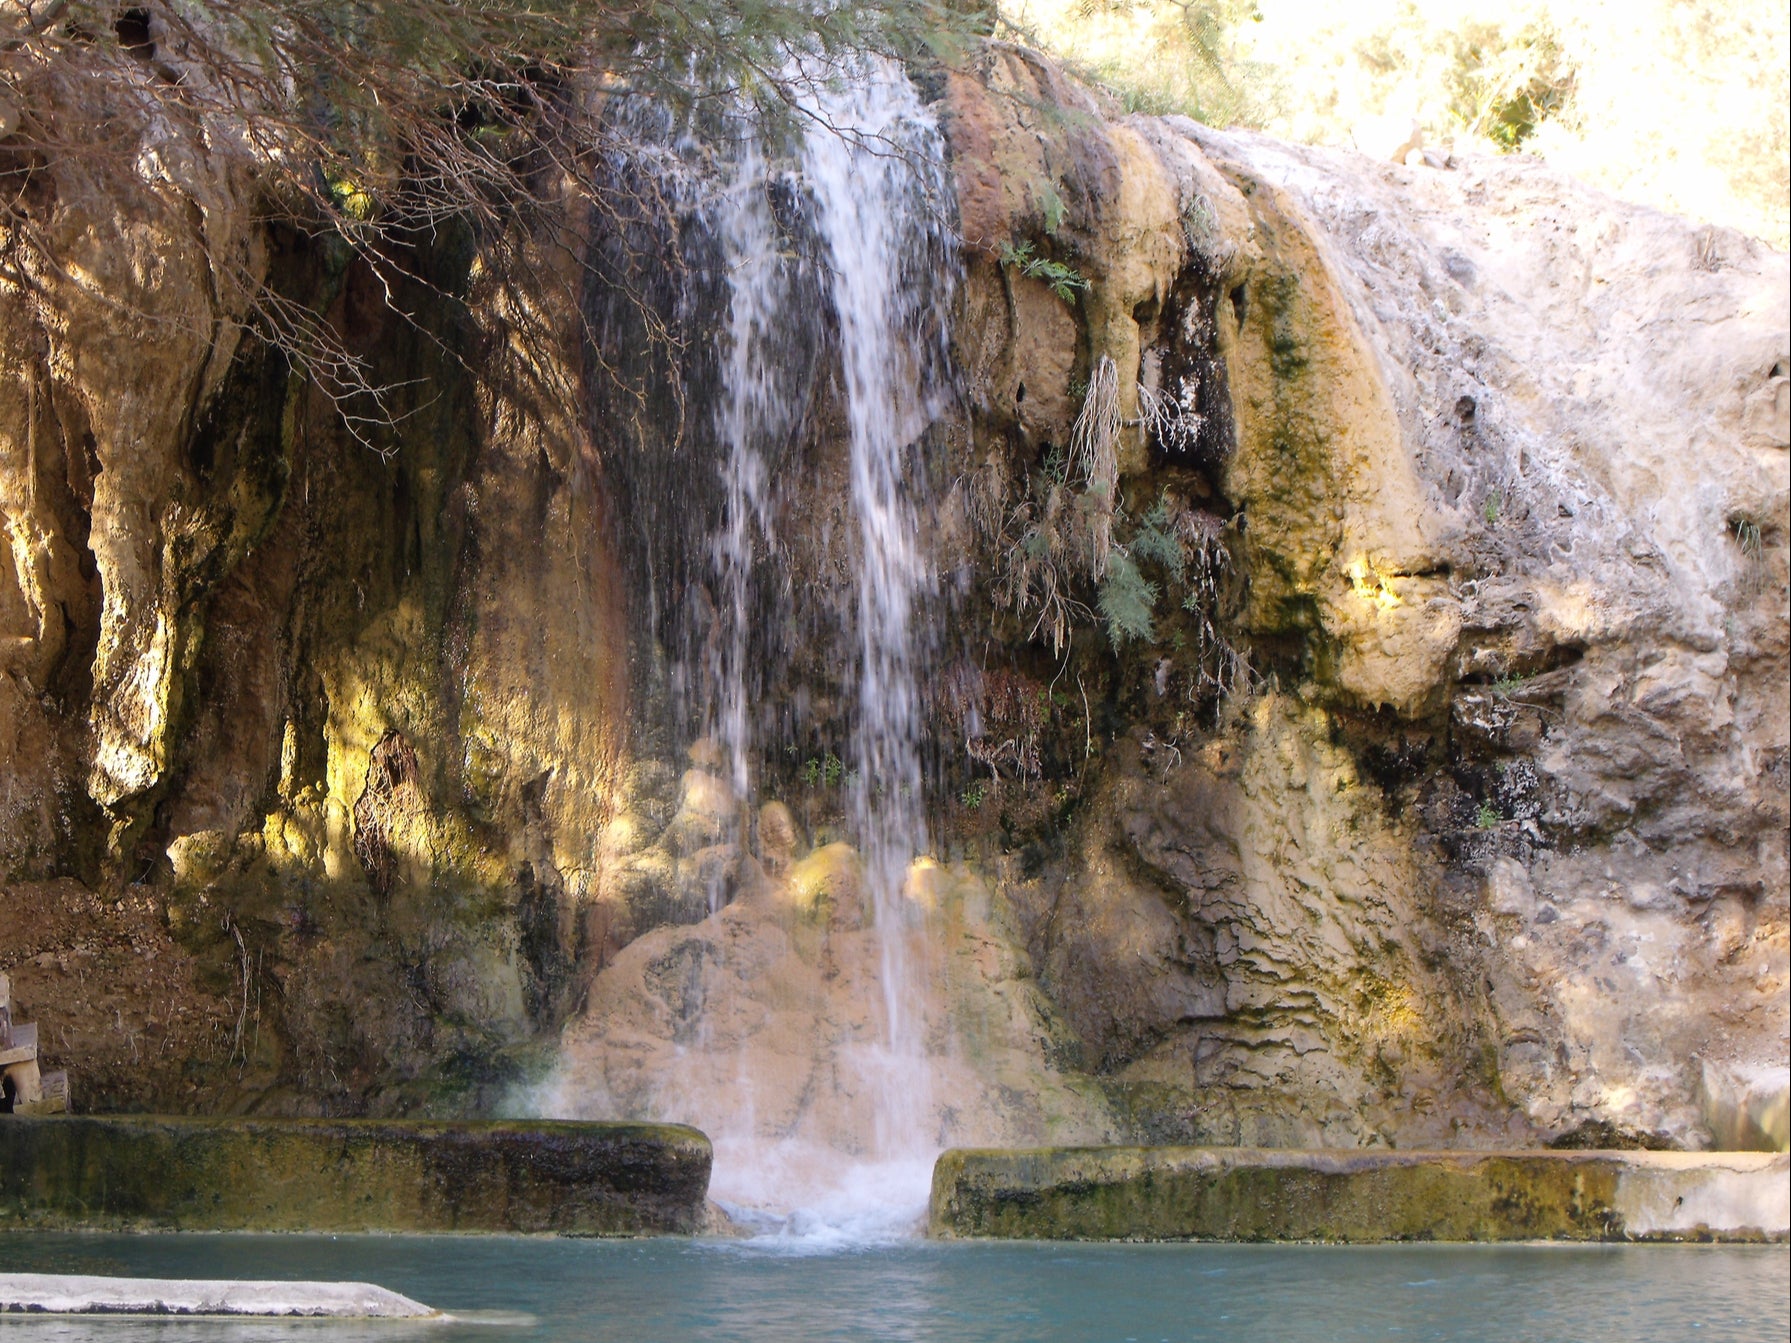 These natural springs and waterfalls can reach 60C